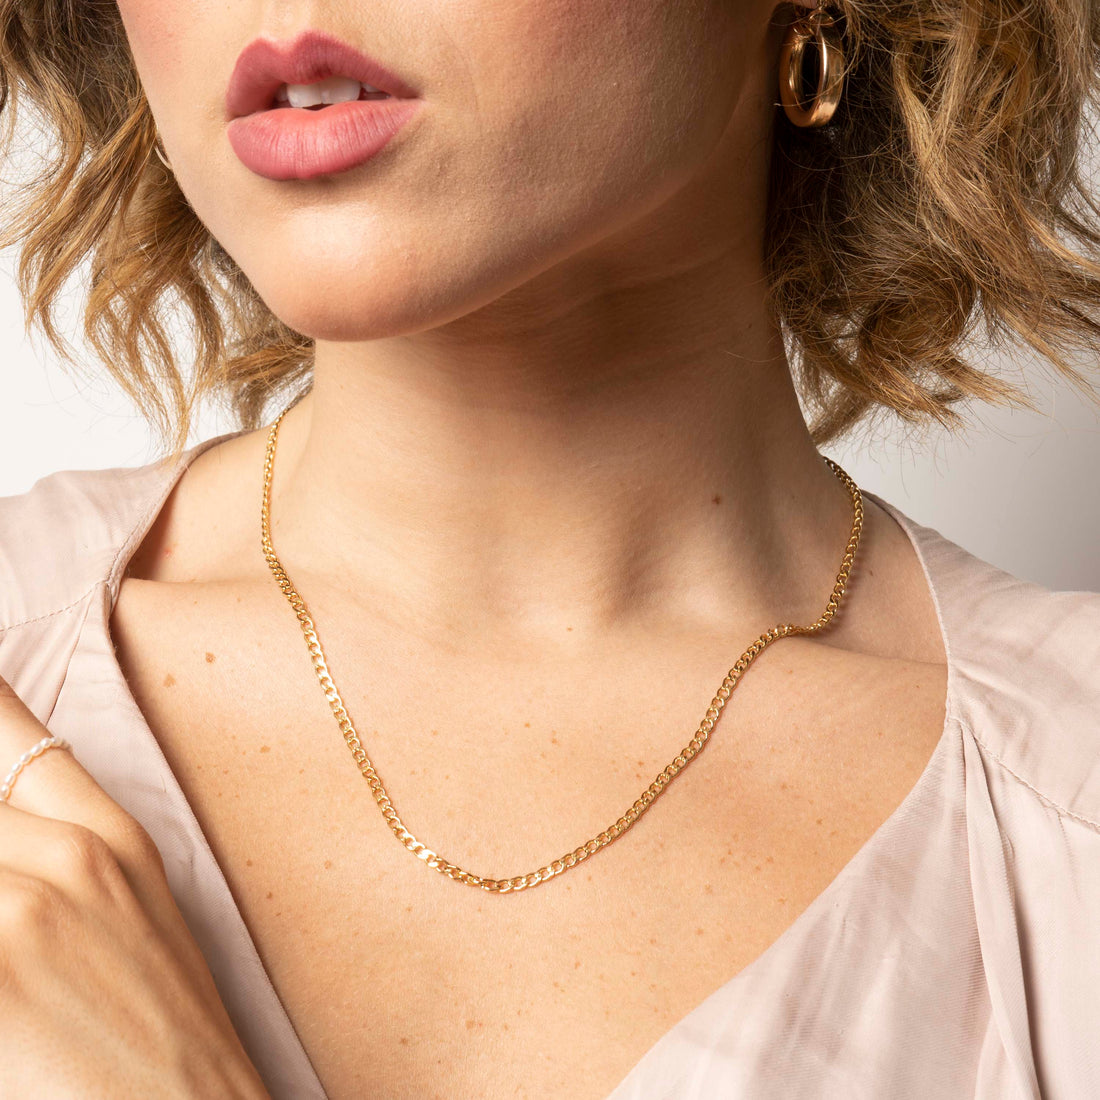 Gold Curb Link Necklace